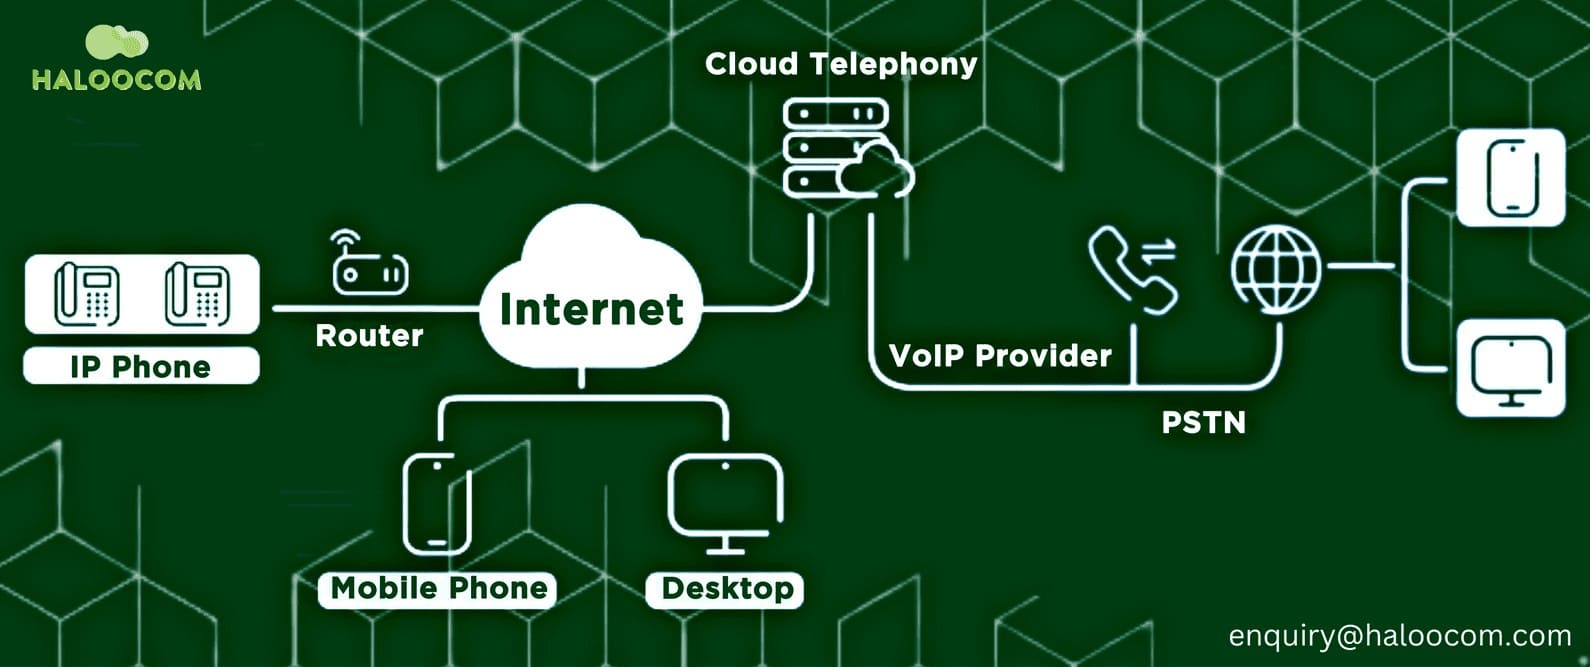 Leading Cloud Telephony Solution for your Businesses